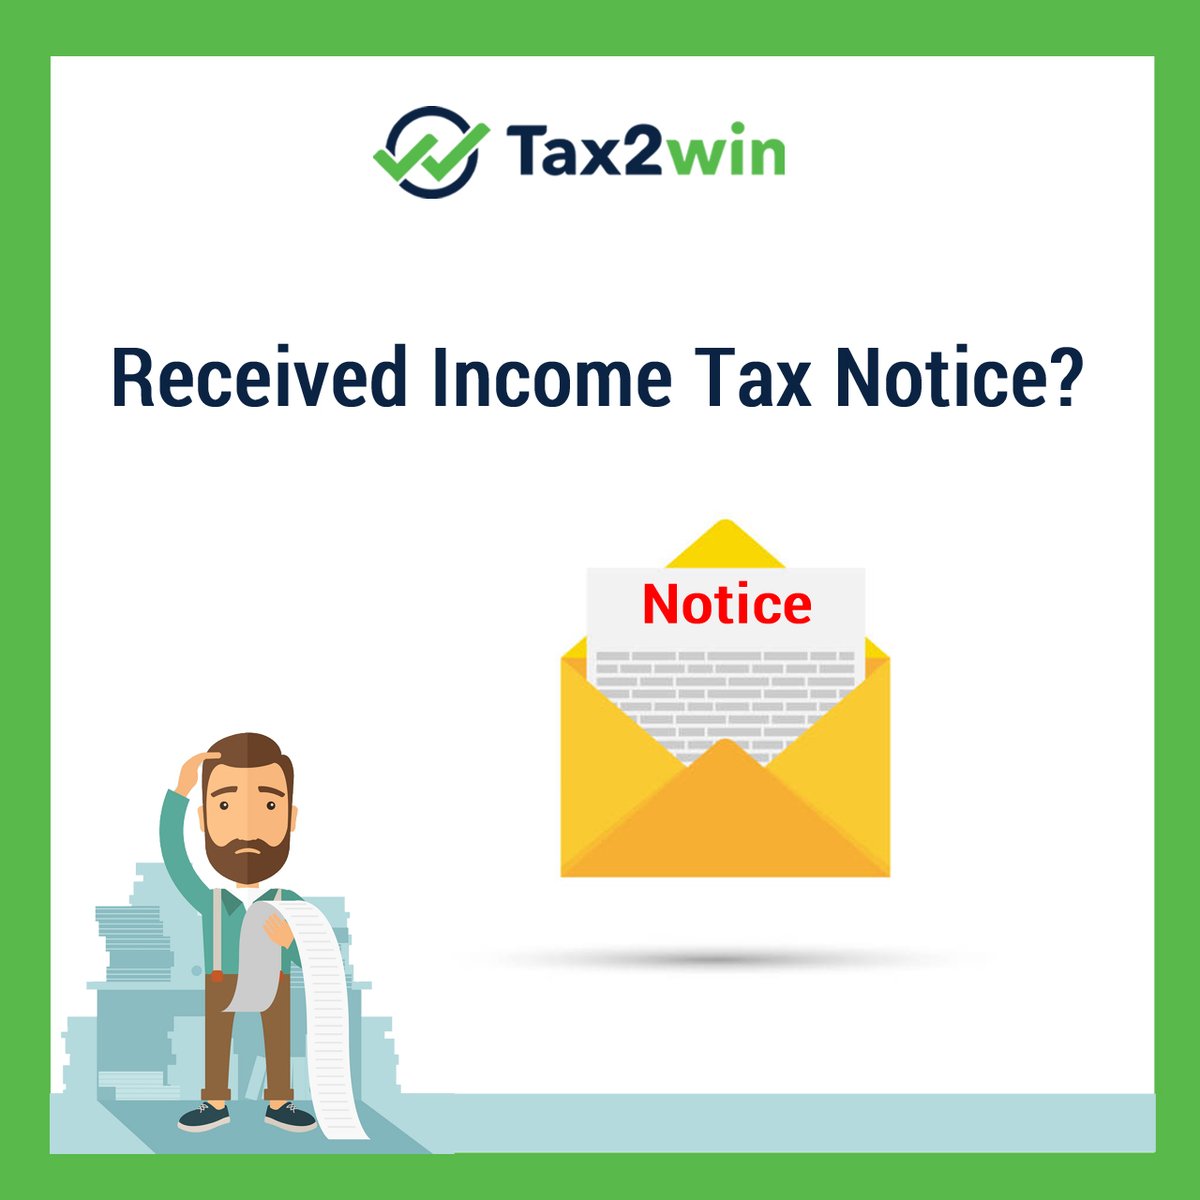 tax2win on twitter: "don't worry our team of income tax consultants will help you solve it online. https://t.co/kqnpegiyoq #incometaxnotice #onlinesolve #tax2win #covid19 #taxconsultants https://t.co/y6l6pwl3oo" / twitter